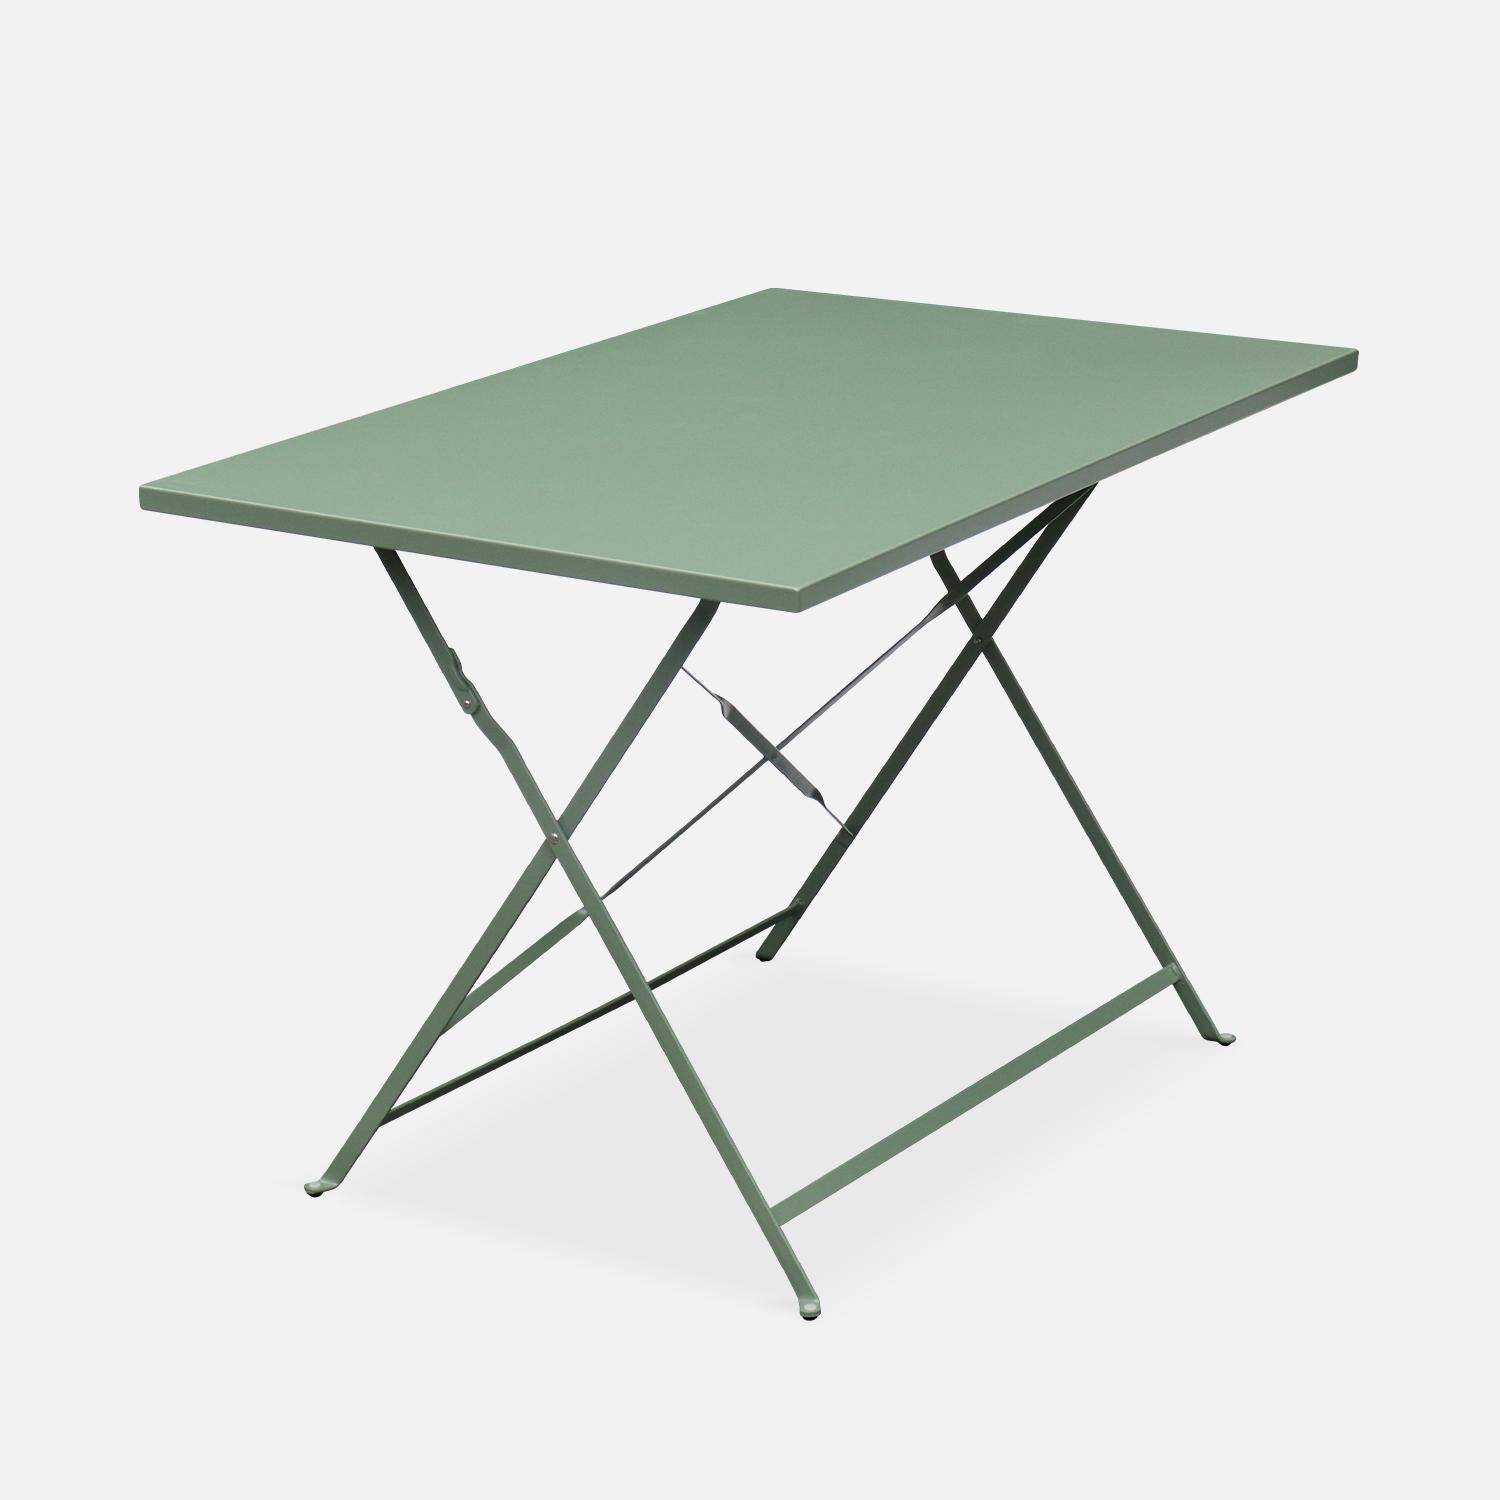 4-seater foldable thermo-lacquered steel bistro garden table with chairs, 110x70cm - Emilia - Sage green Photo3